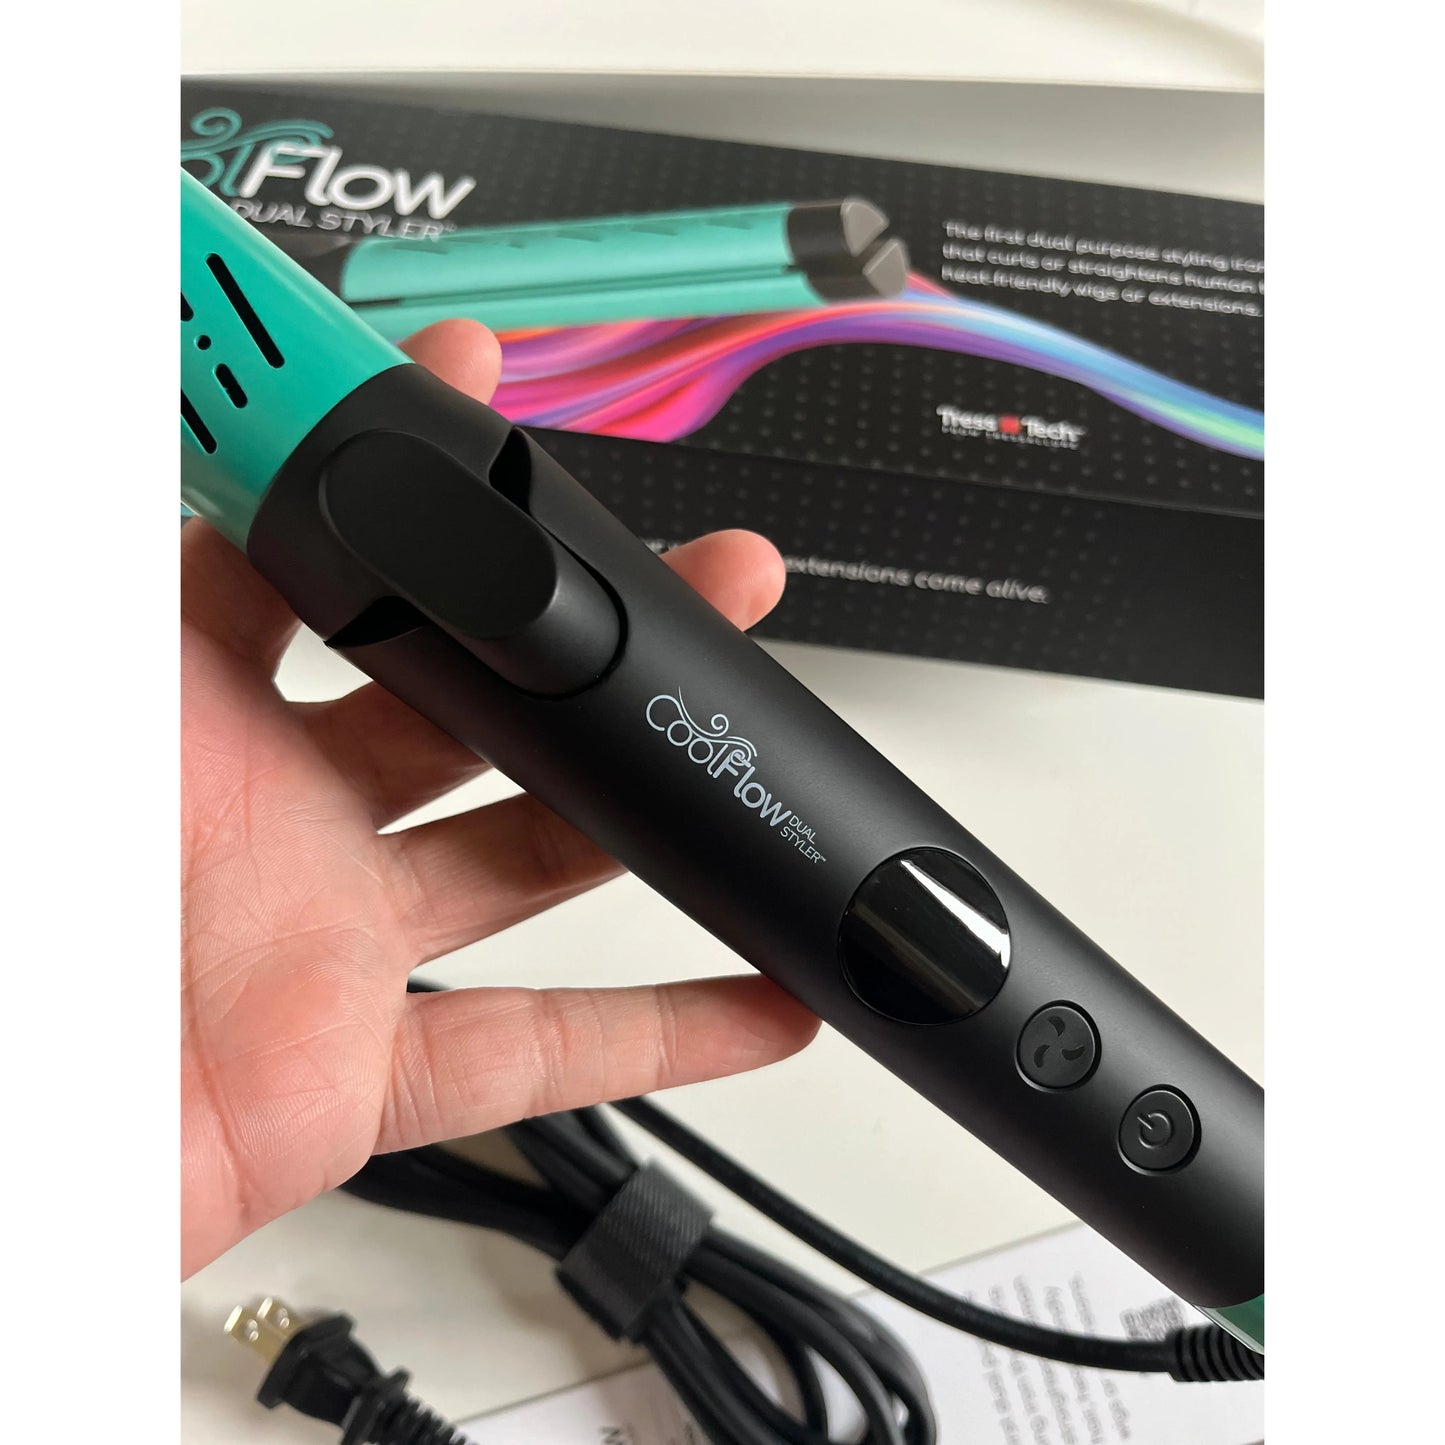 TressTech CoolFlow Dual Styler by TressAllure NEW!!